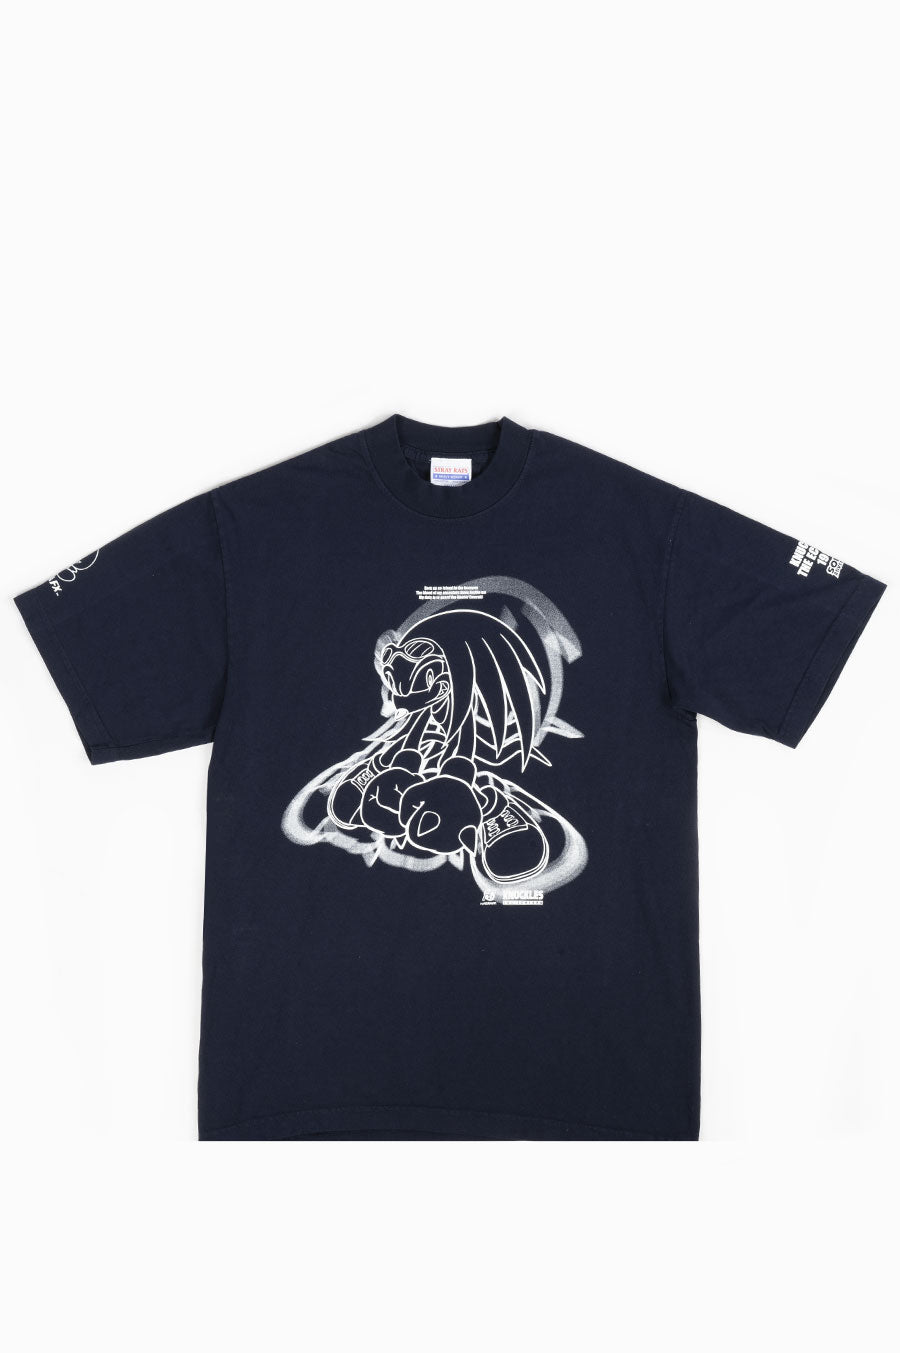 STRAY RATS X SONIC THE HEDGEHOG KNUCKLES 1998 TEE NAVY